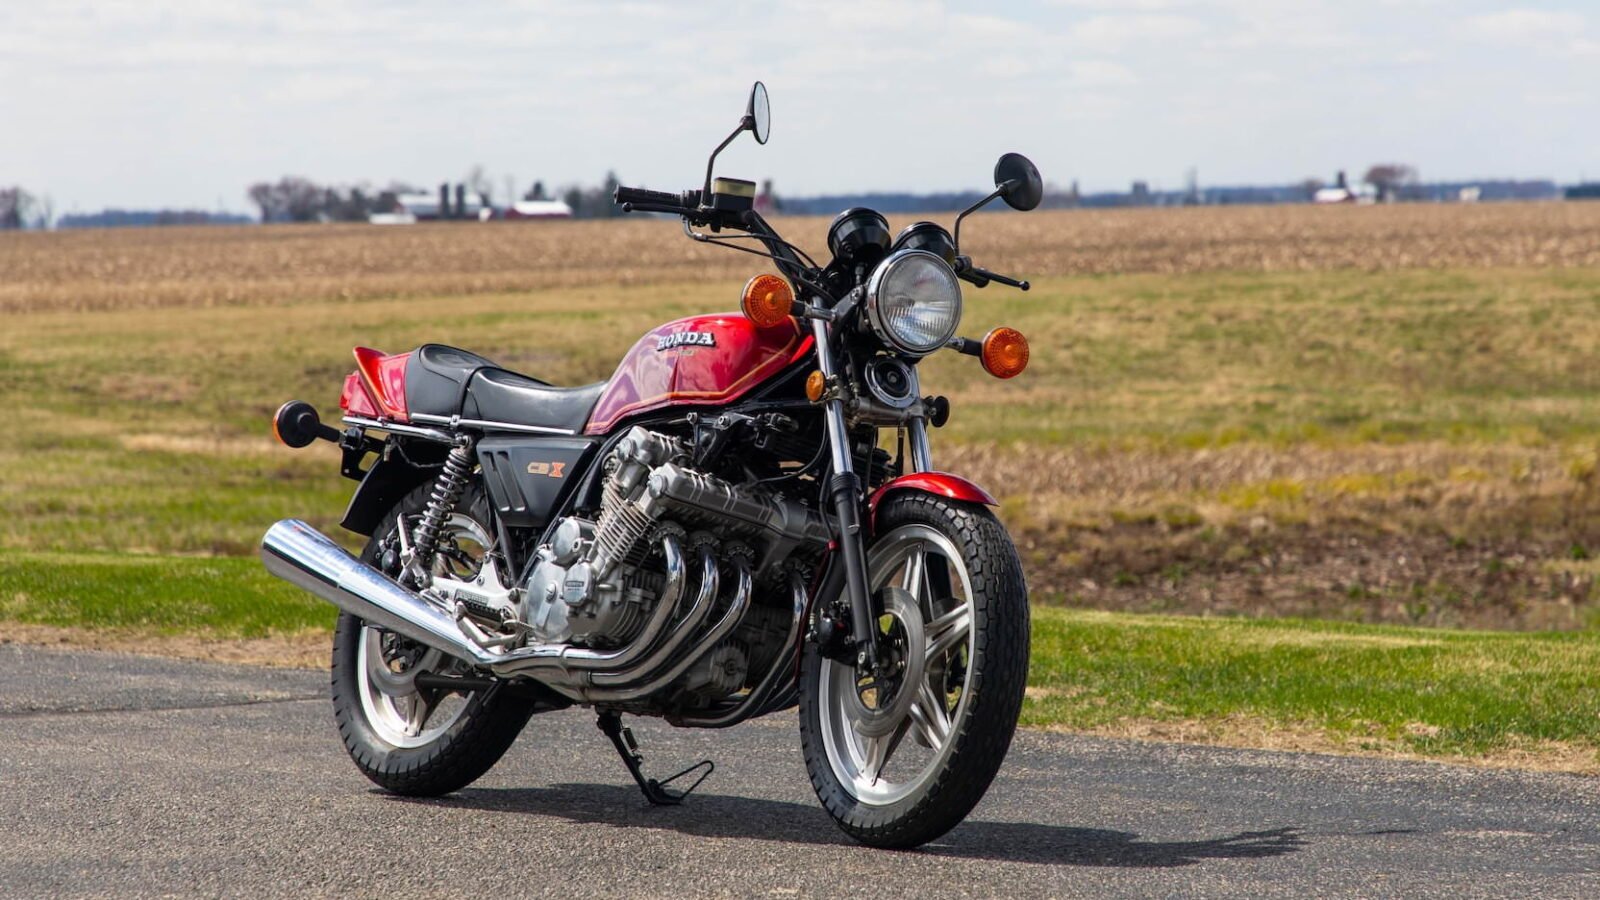 The Honda CBX - An Unusual Japanese Inline-6 Cylinder Motorcycle